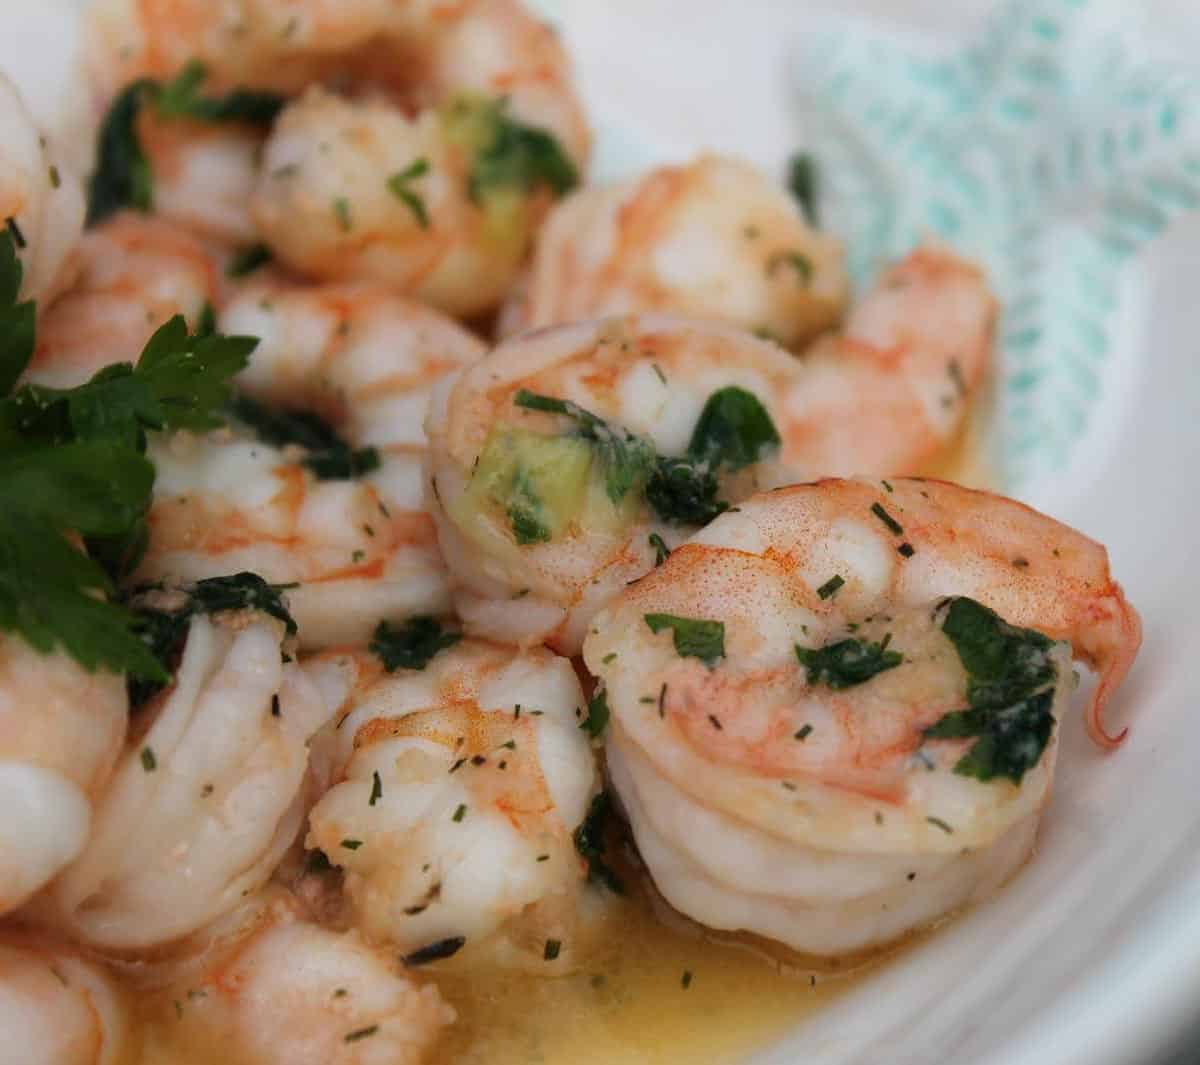  Juicy and succulent shrimp, cooked to perfection.